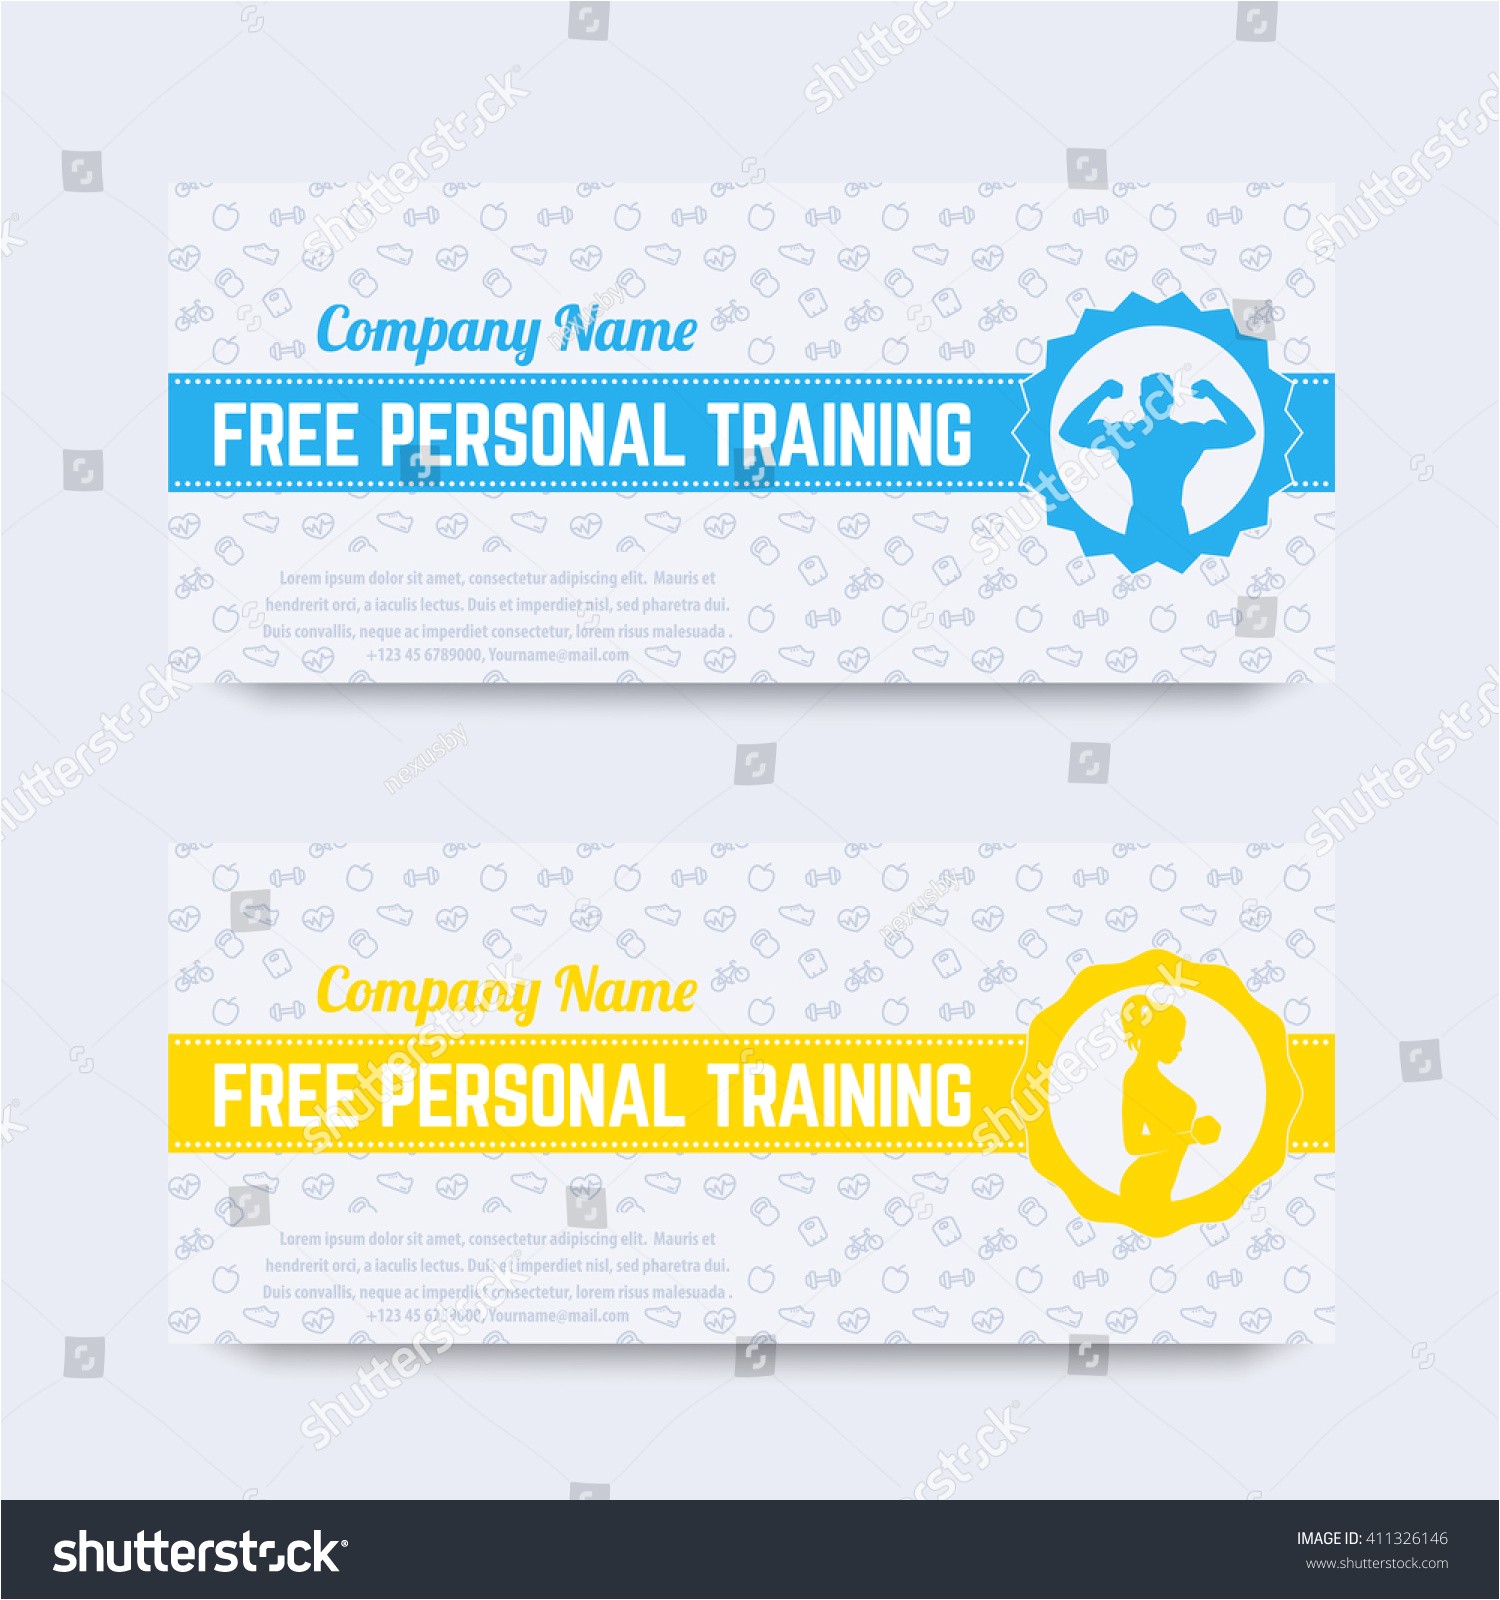 Personal Training Gift Certificate Template Personal Training Gift Certificate Template